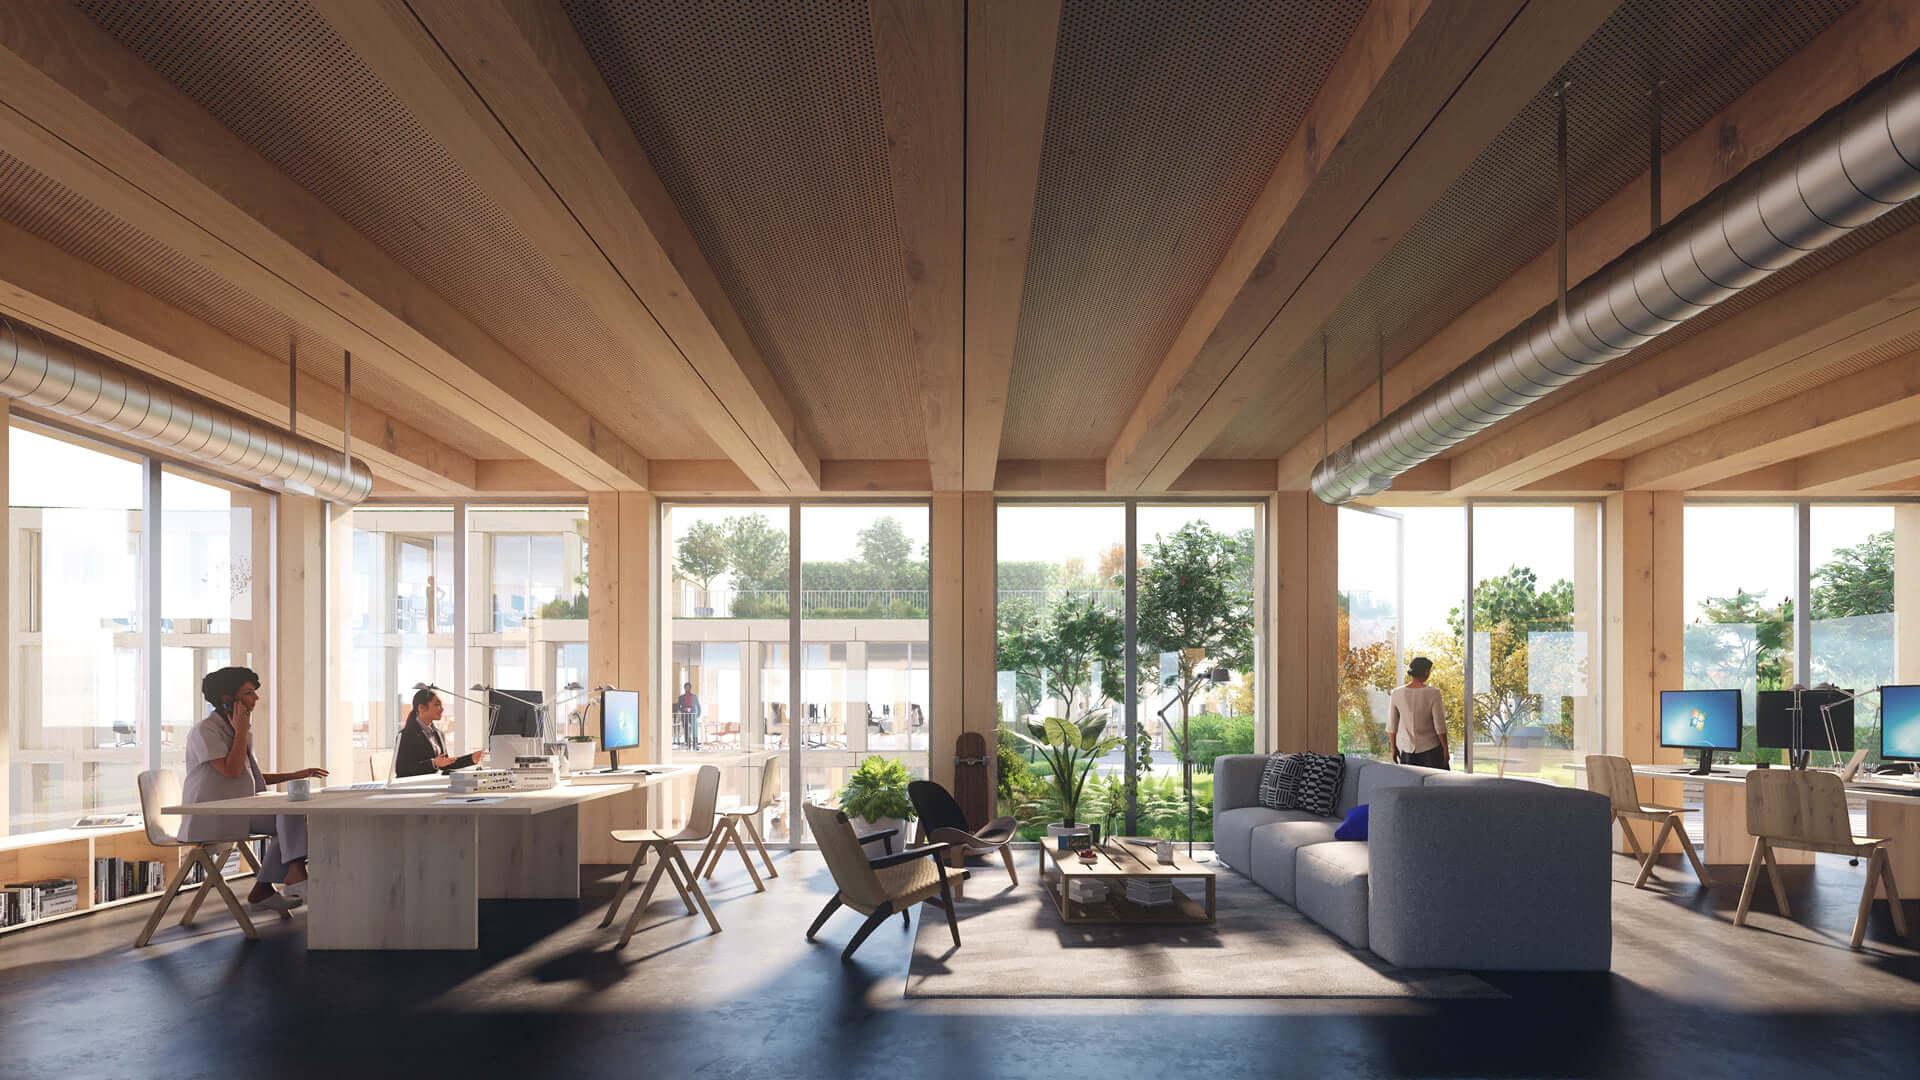 rendering of an open office space with CLT beams